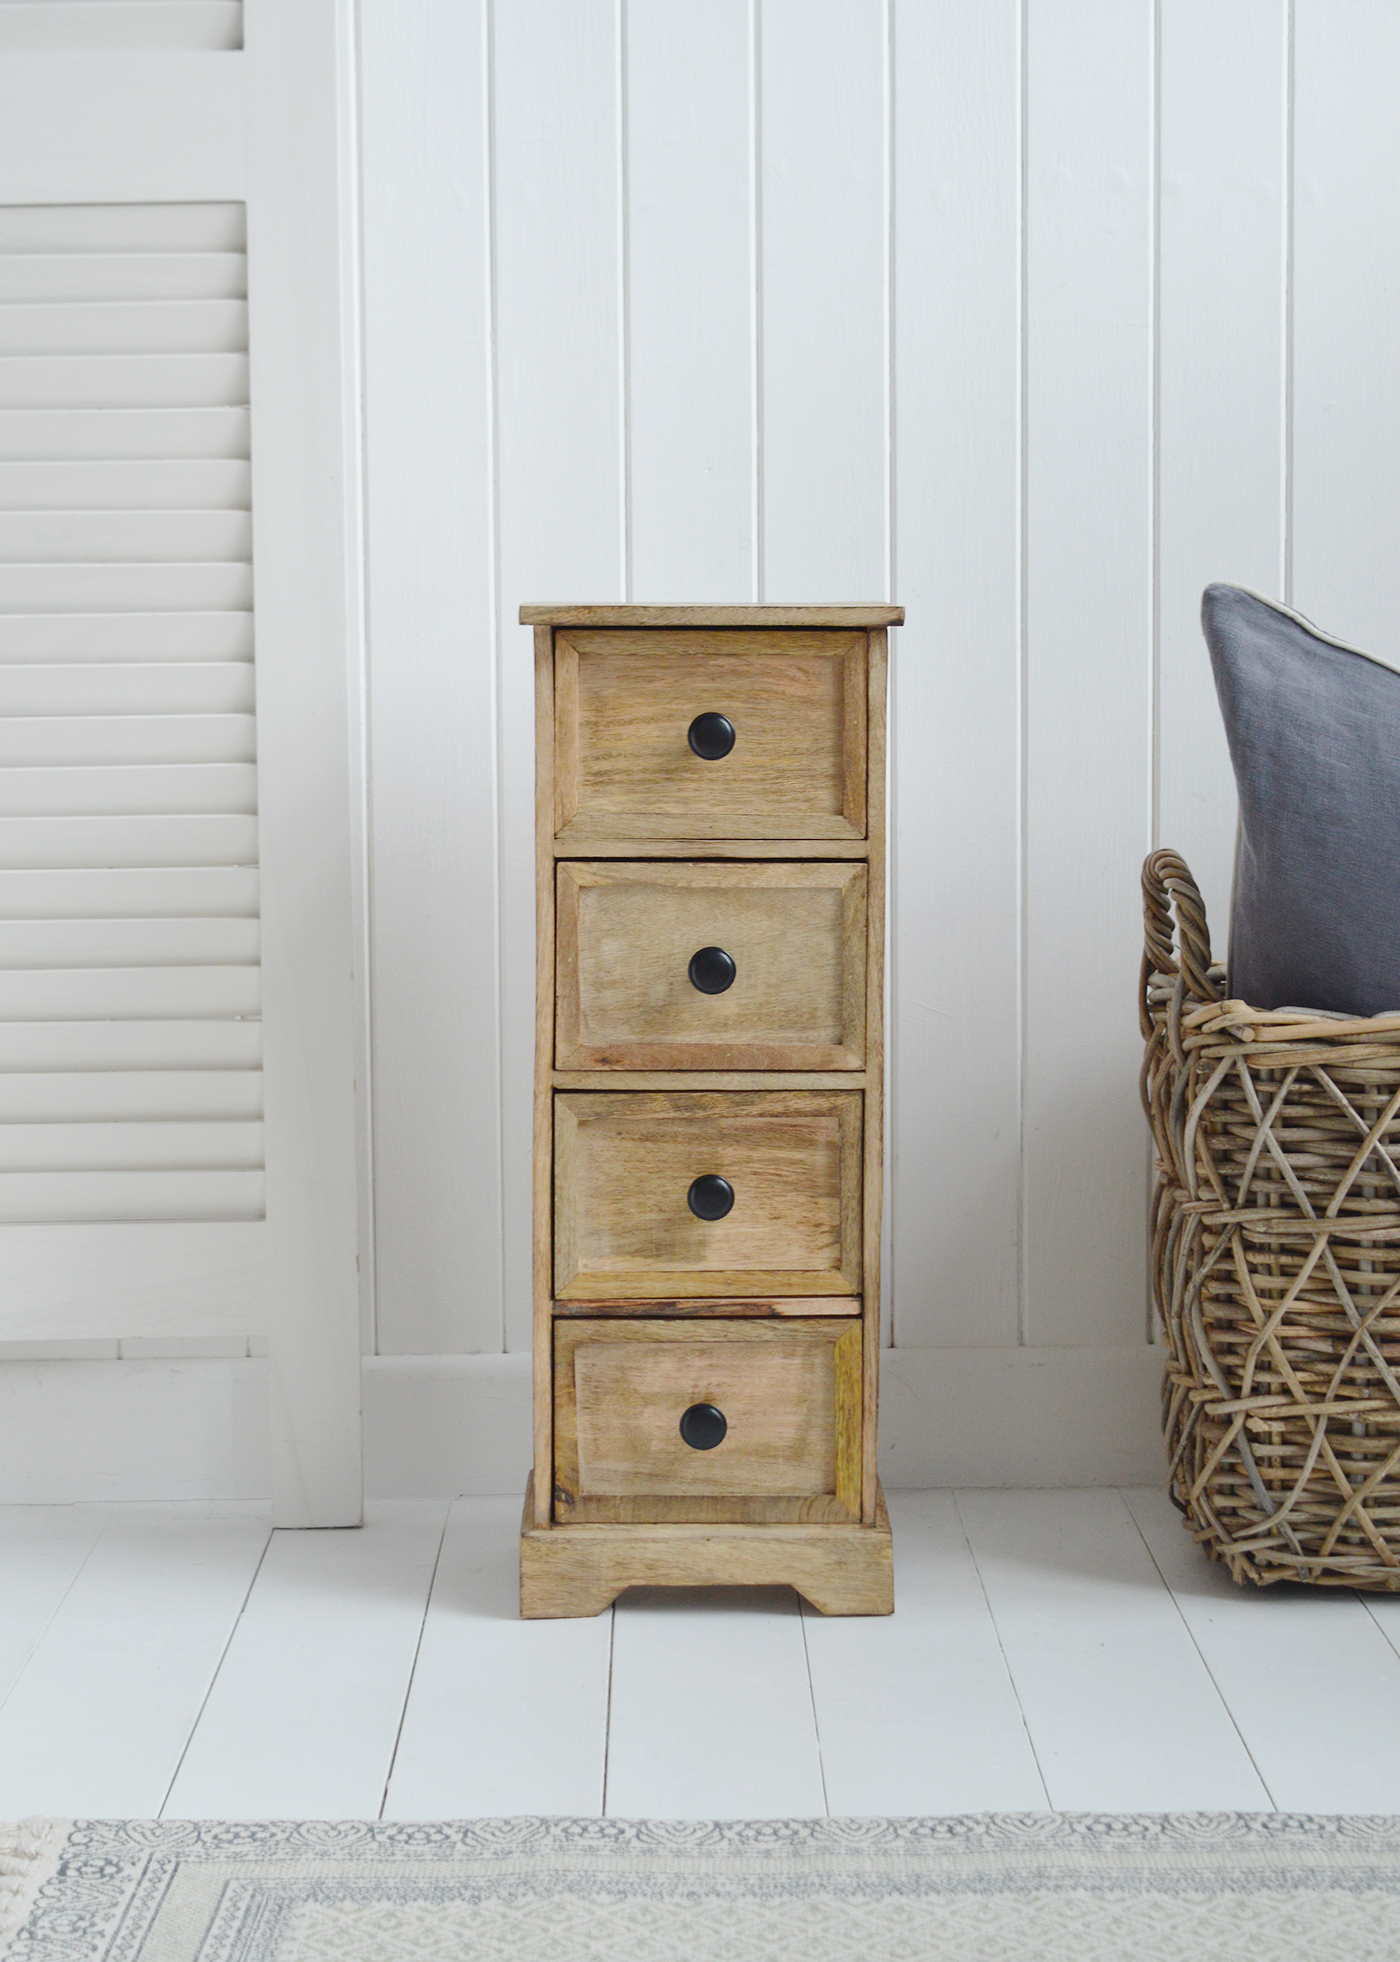 The Dorset narrow bedside table, 23cm wide, with 4 drawers for besdie the bed.